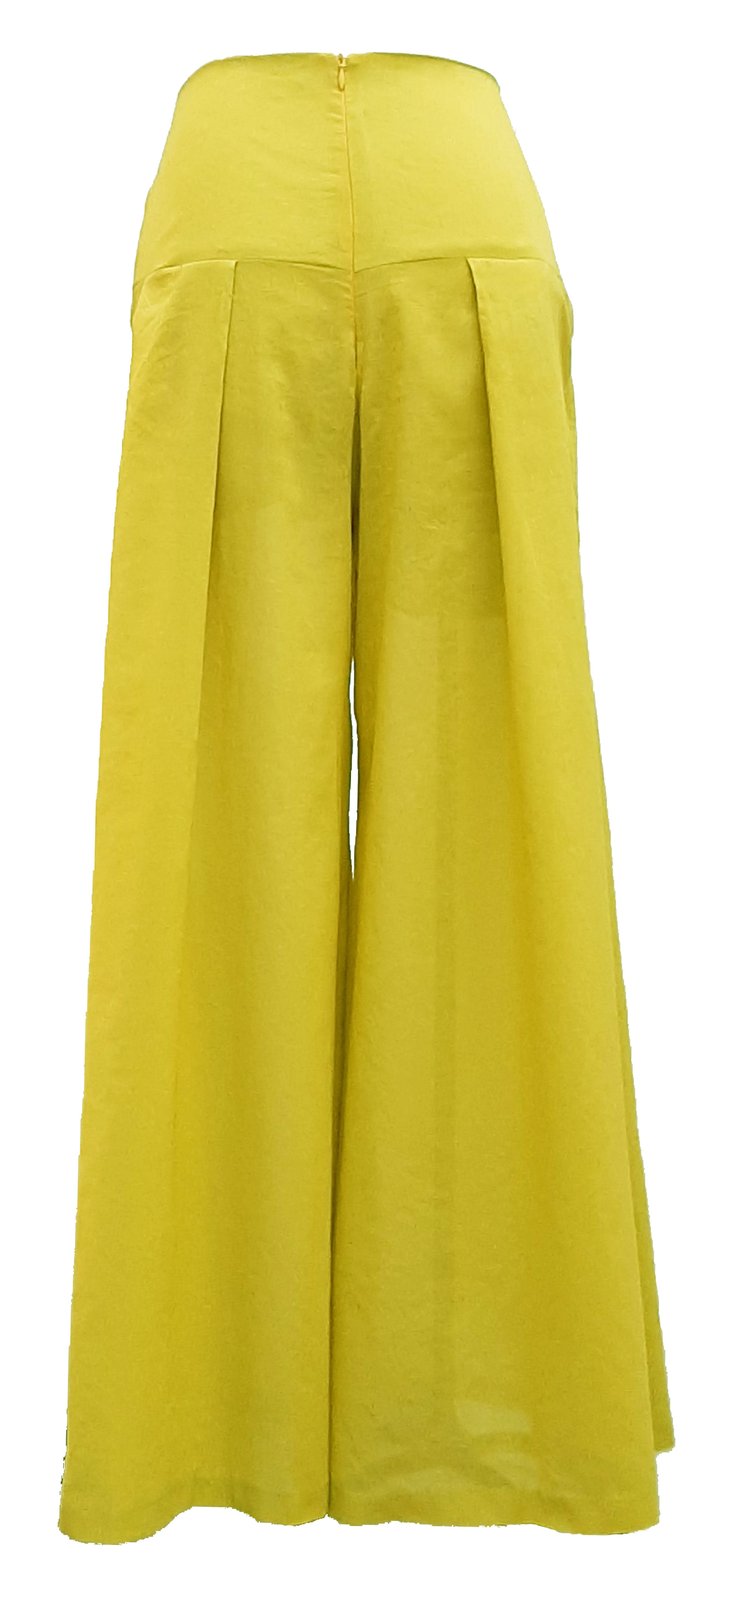 Ambiance Apparel Women's Juniors Wide Leg Spring Linen Pants (S, Mustard)  at Amazon Women's Clothing store